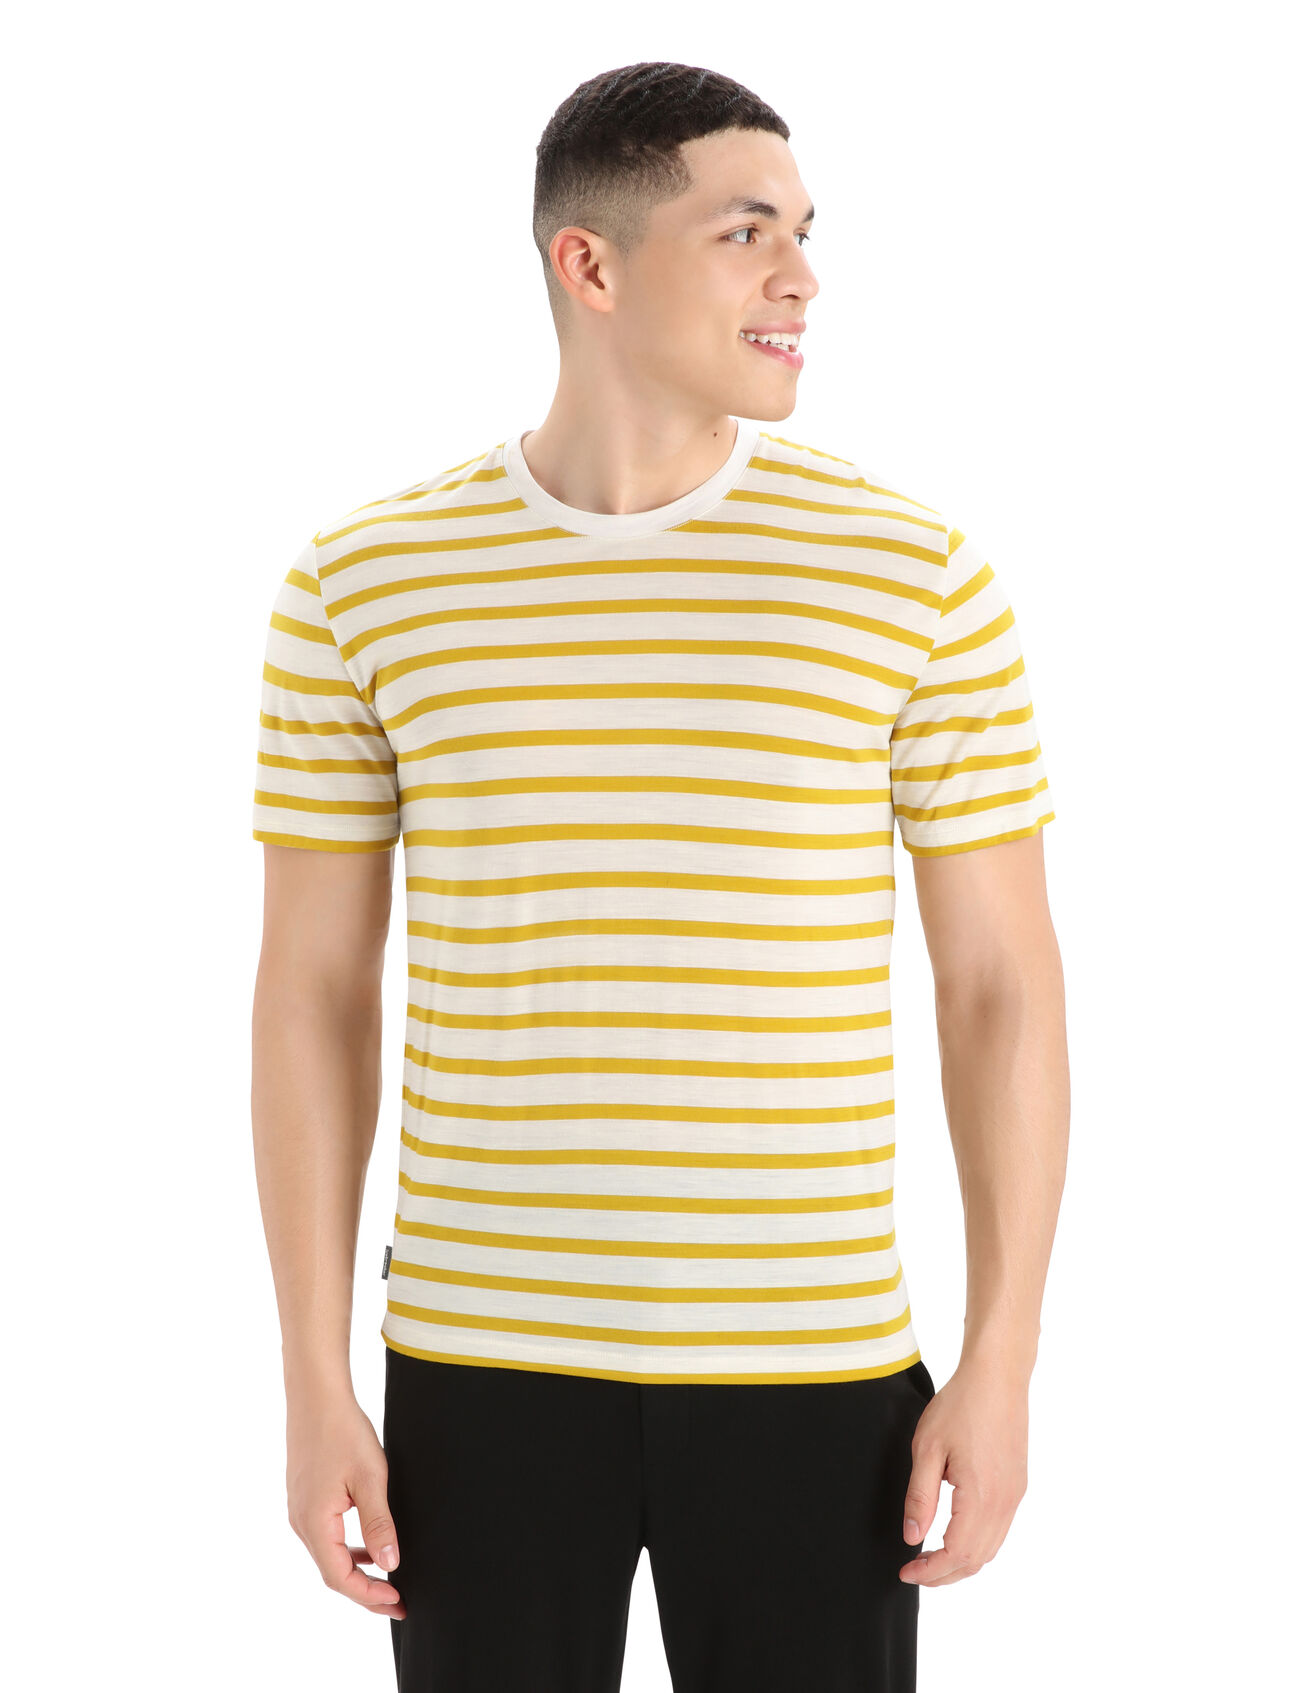 Mens Merino Drayden Short Sleeve T-Shirt Stripe A classic, stylish tee with everyday versatility and incredible breathability, the Drayden Short Sleeve Tee Stripe features our moisture-managing Cool-Lite™merino jersey fabric.